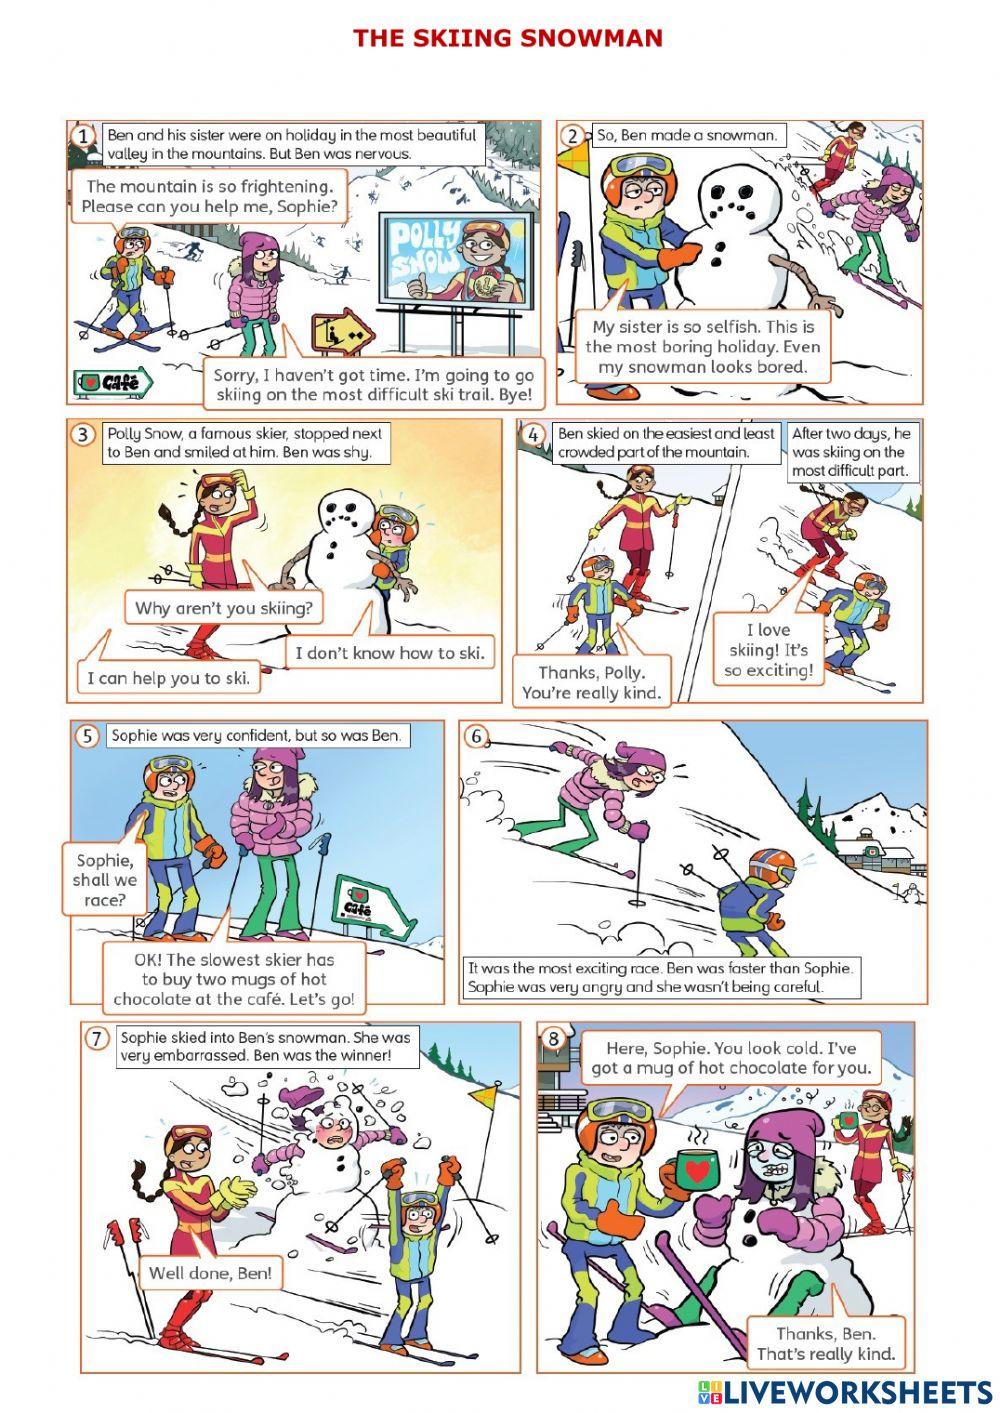 Adjectives - The Skiing Snowman